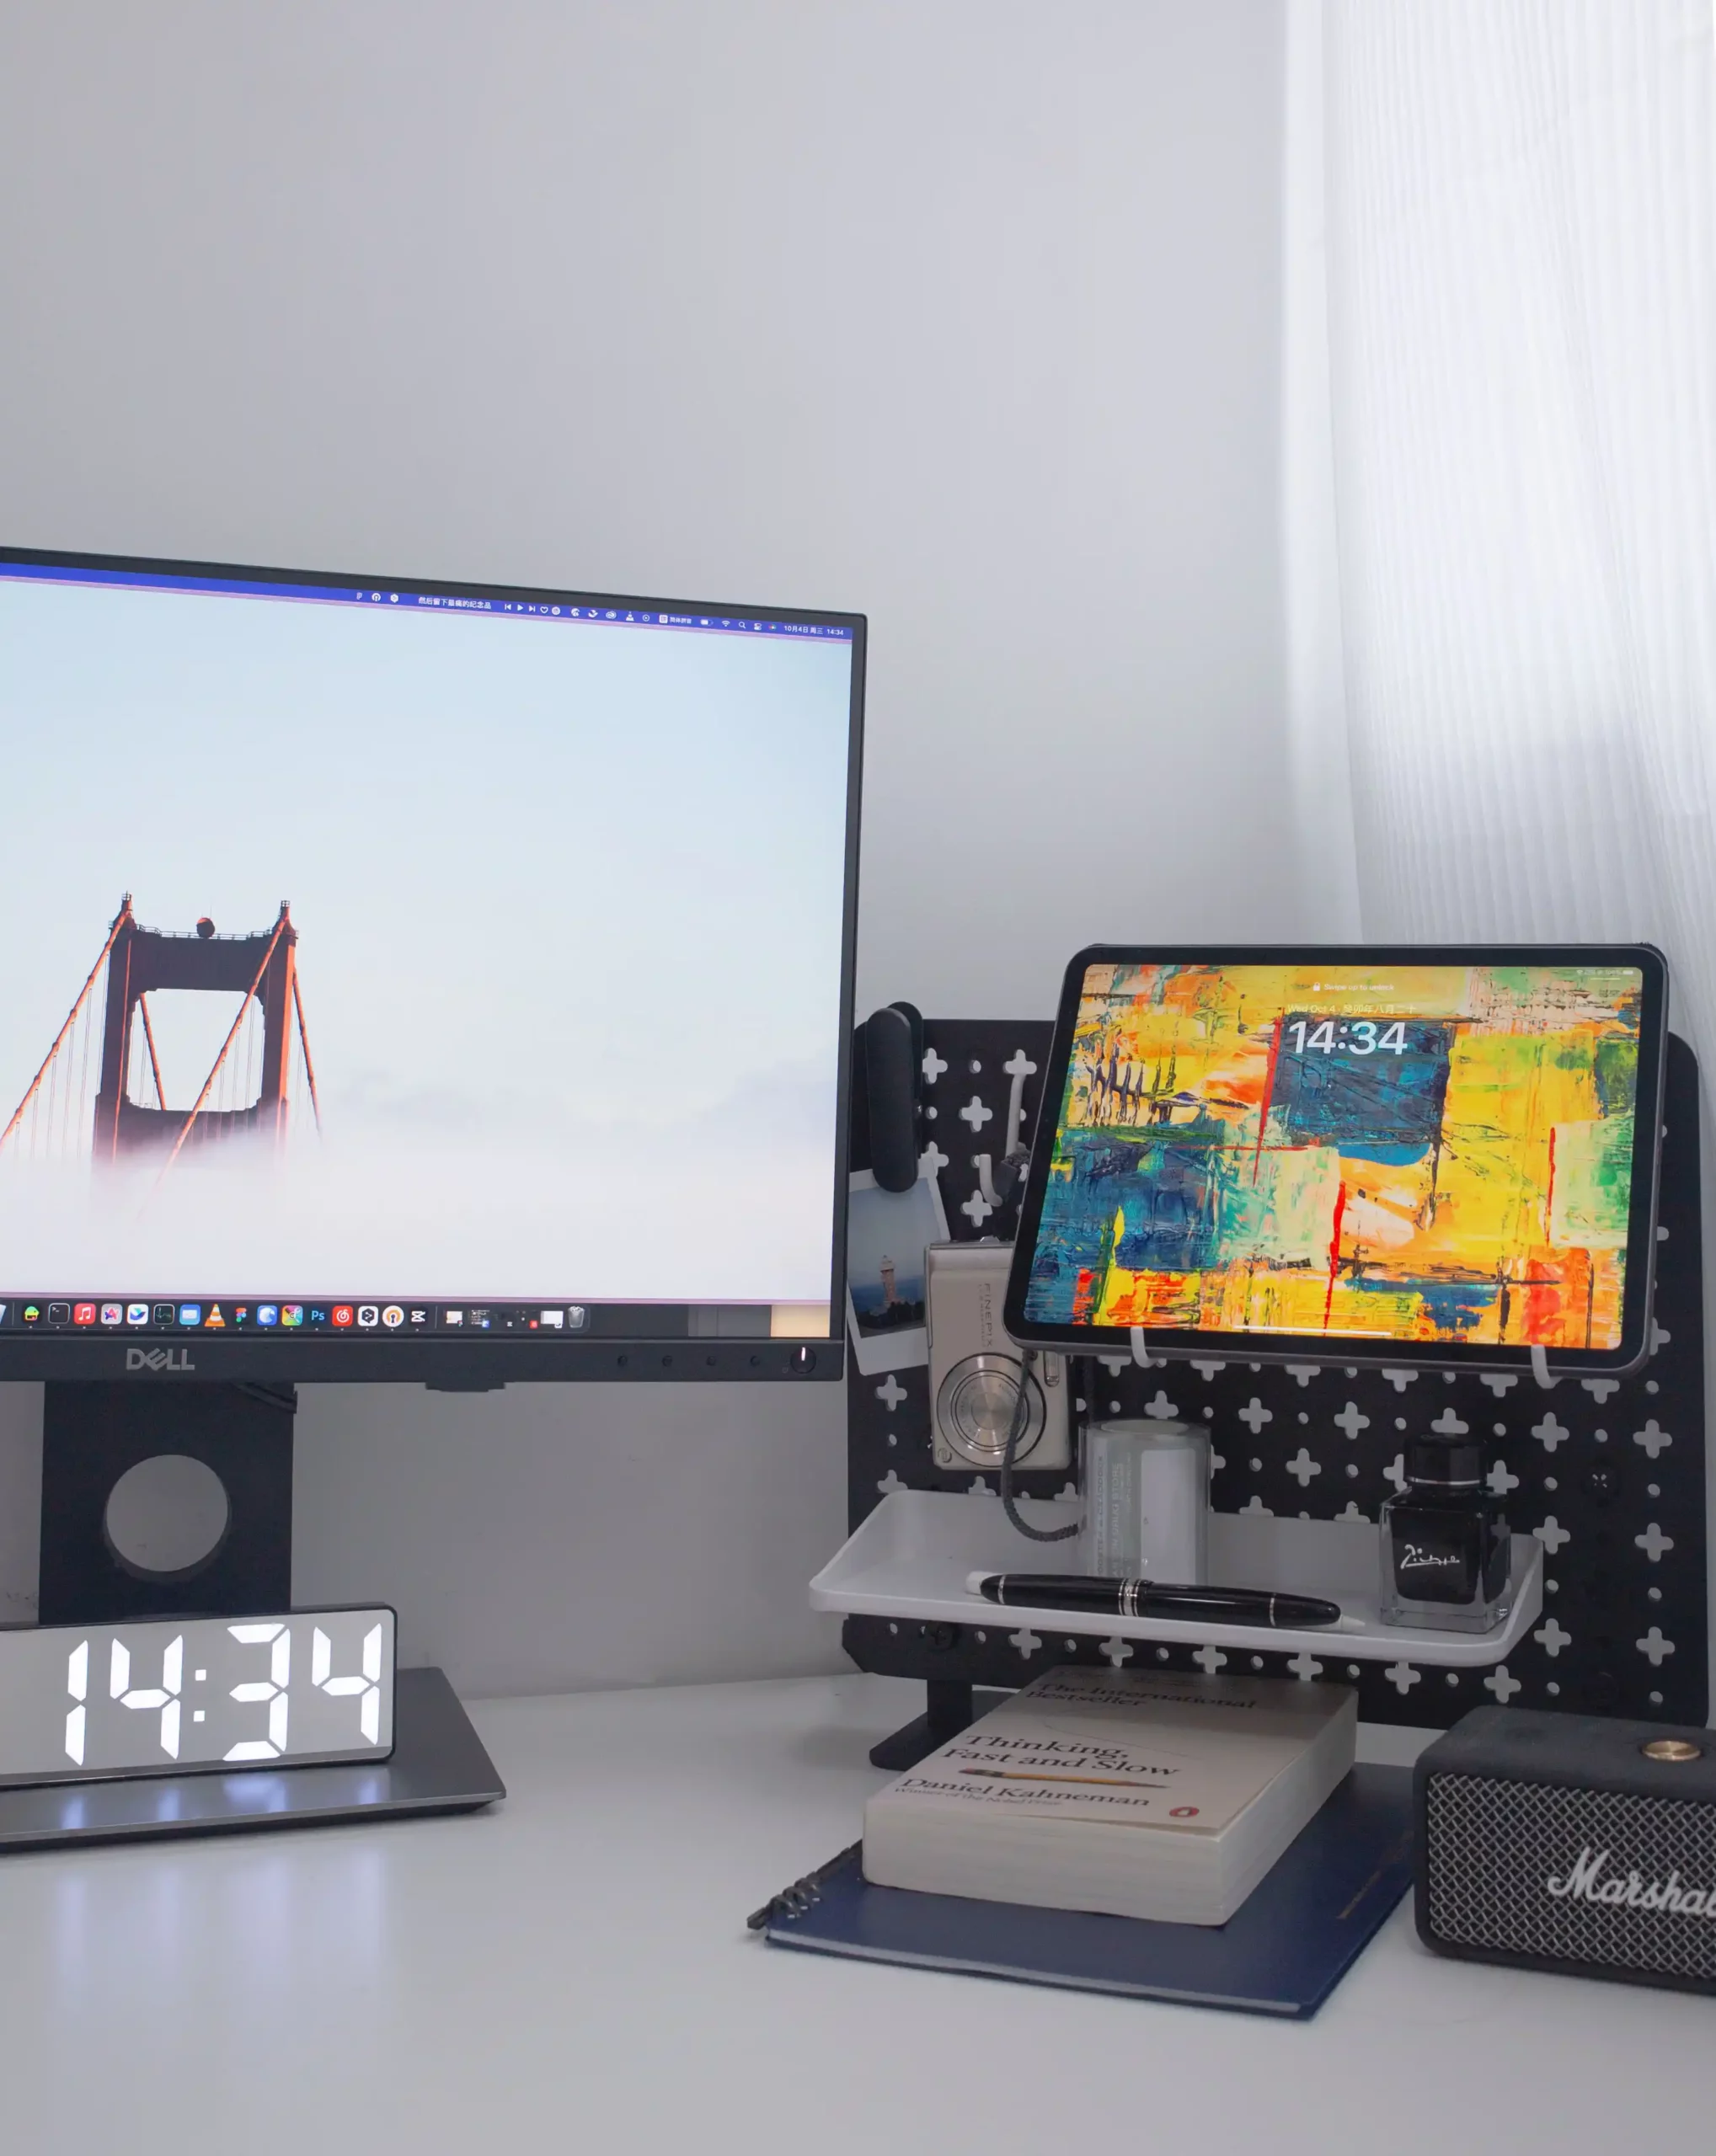 A minimalistic workstation with a computer monitor displaying an image of a bridge, an iPad with an abstract art wallpaper, and assorted desk accessories including a digital clock displaying 14:34.